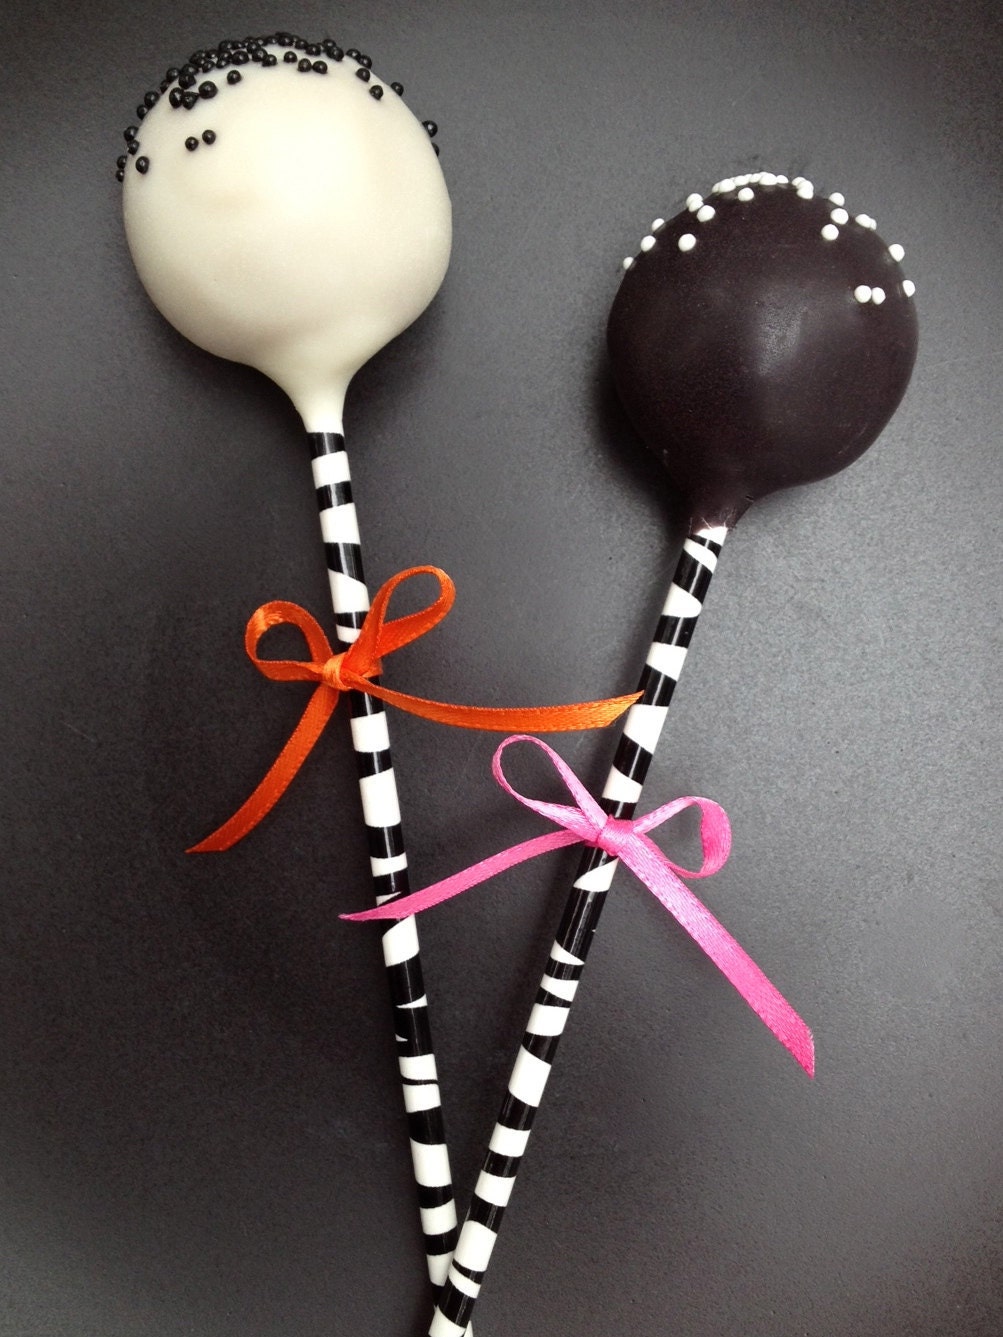 Black and White Cake Pops by sweetpopsshop on Etsy